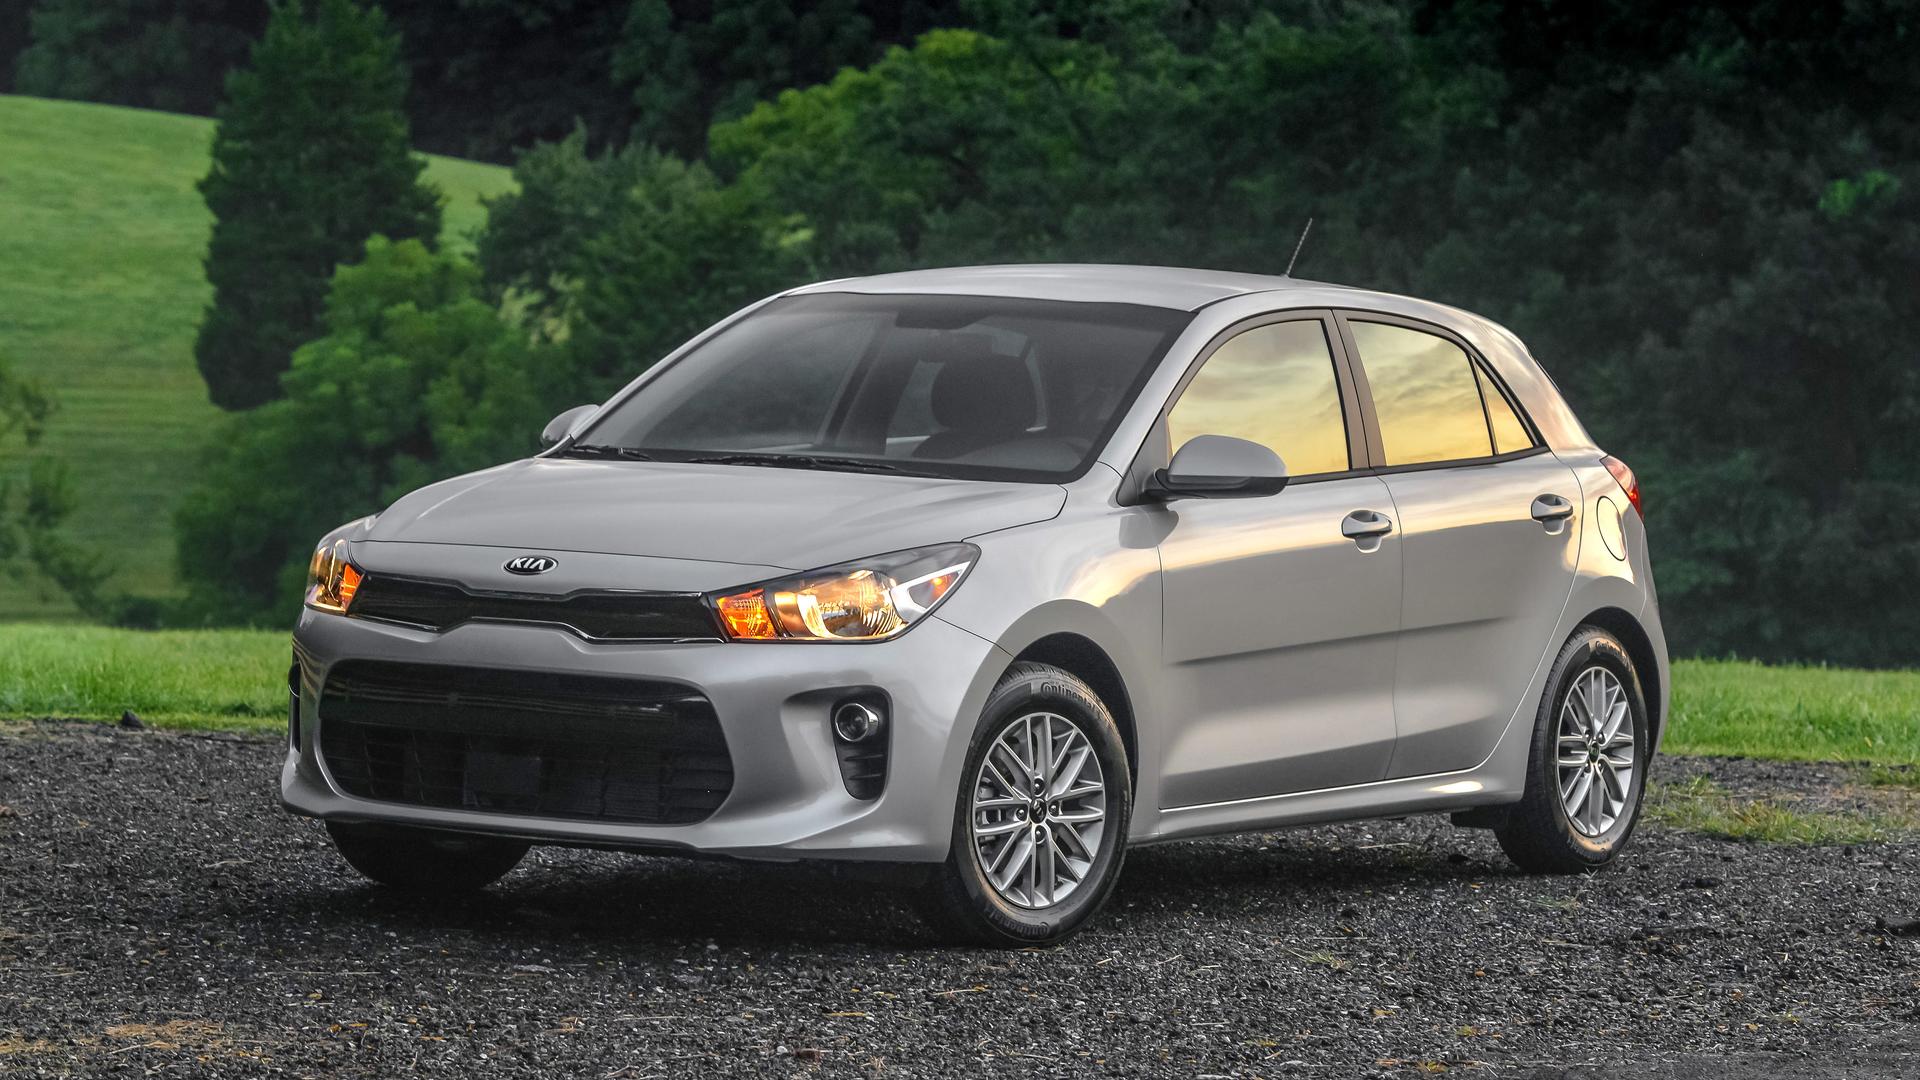 Style in a Small Package - The KIA Rio